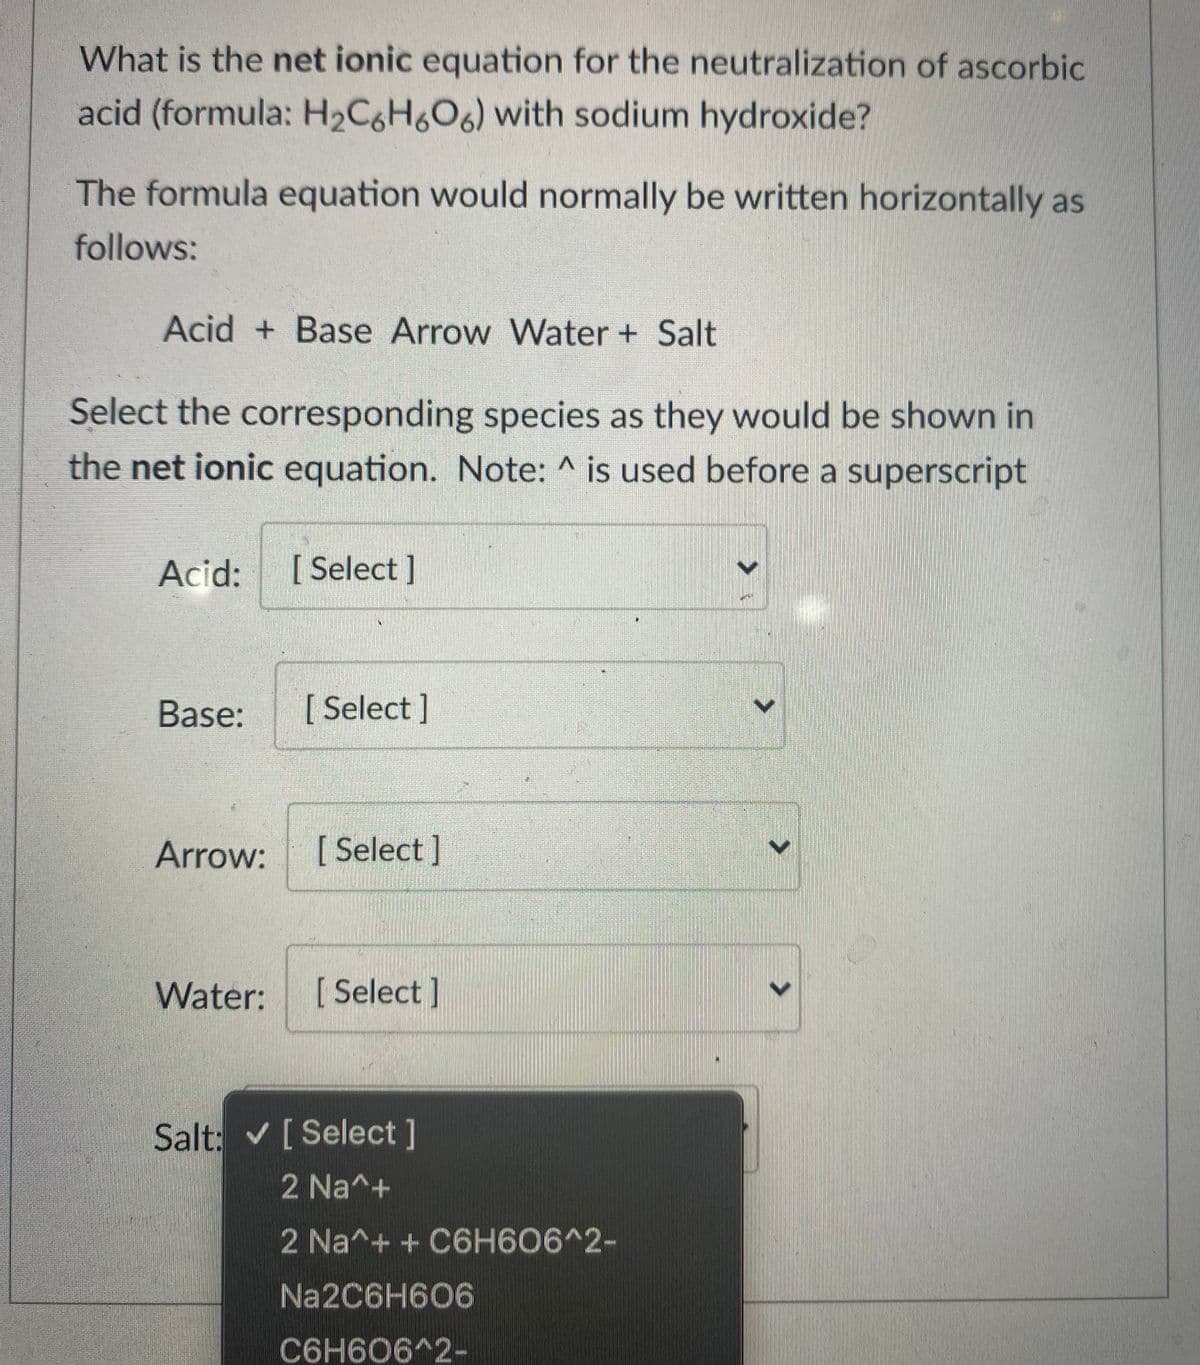 What is the net ionic equation for the neutralization of ascorbic
acid (formula: H2C6H6O6) with sodium hydroxide?
The formula equation would normally be written horizontally as
follows:
Acid + Base Arrow Water + Salt
Select the corresponding species as they would be shown in
the net ionic equation. Note: ^ is used before a superscript
Acid:
[ Select ]
Base:
[ Select ]
Arrow:
[ Select ]
Water:
[ Select]
Salt: v [Select]
2 Na^+
2 Na^+ + C6H606^2-
Na2C6H606
C6H606^2-
